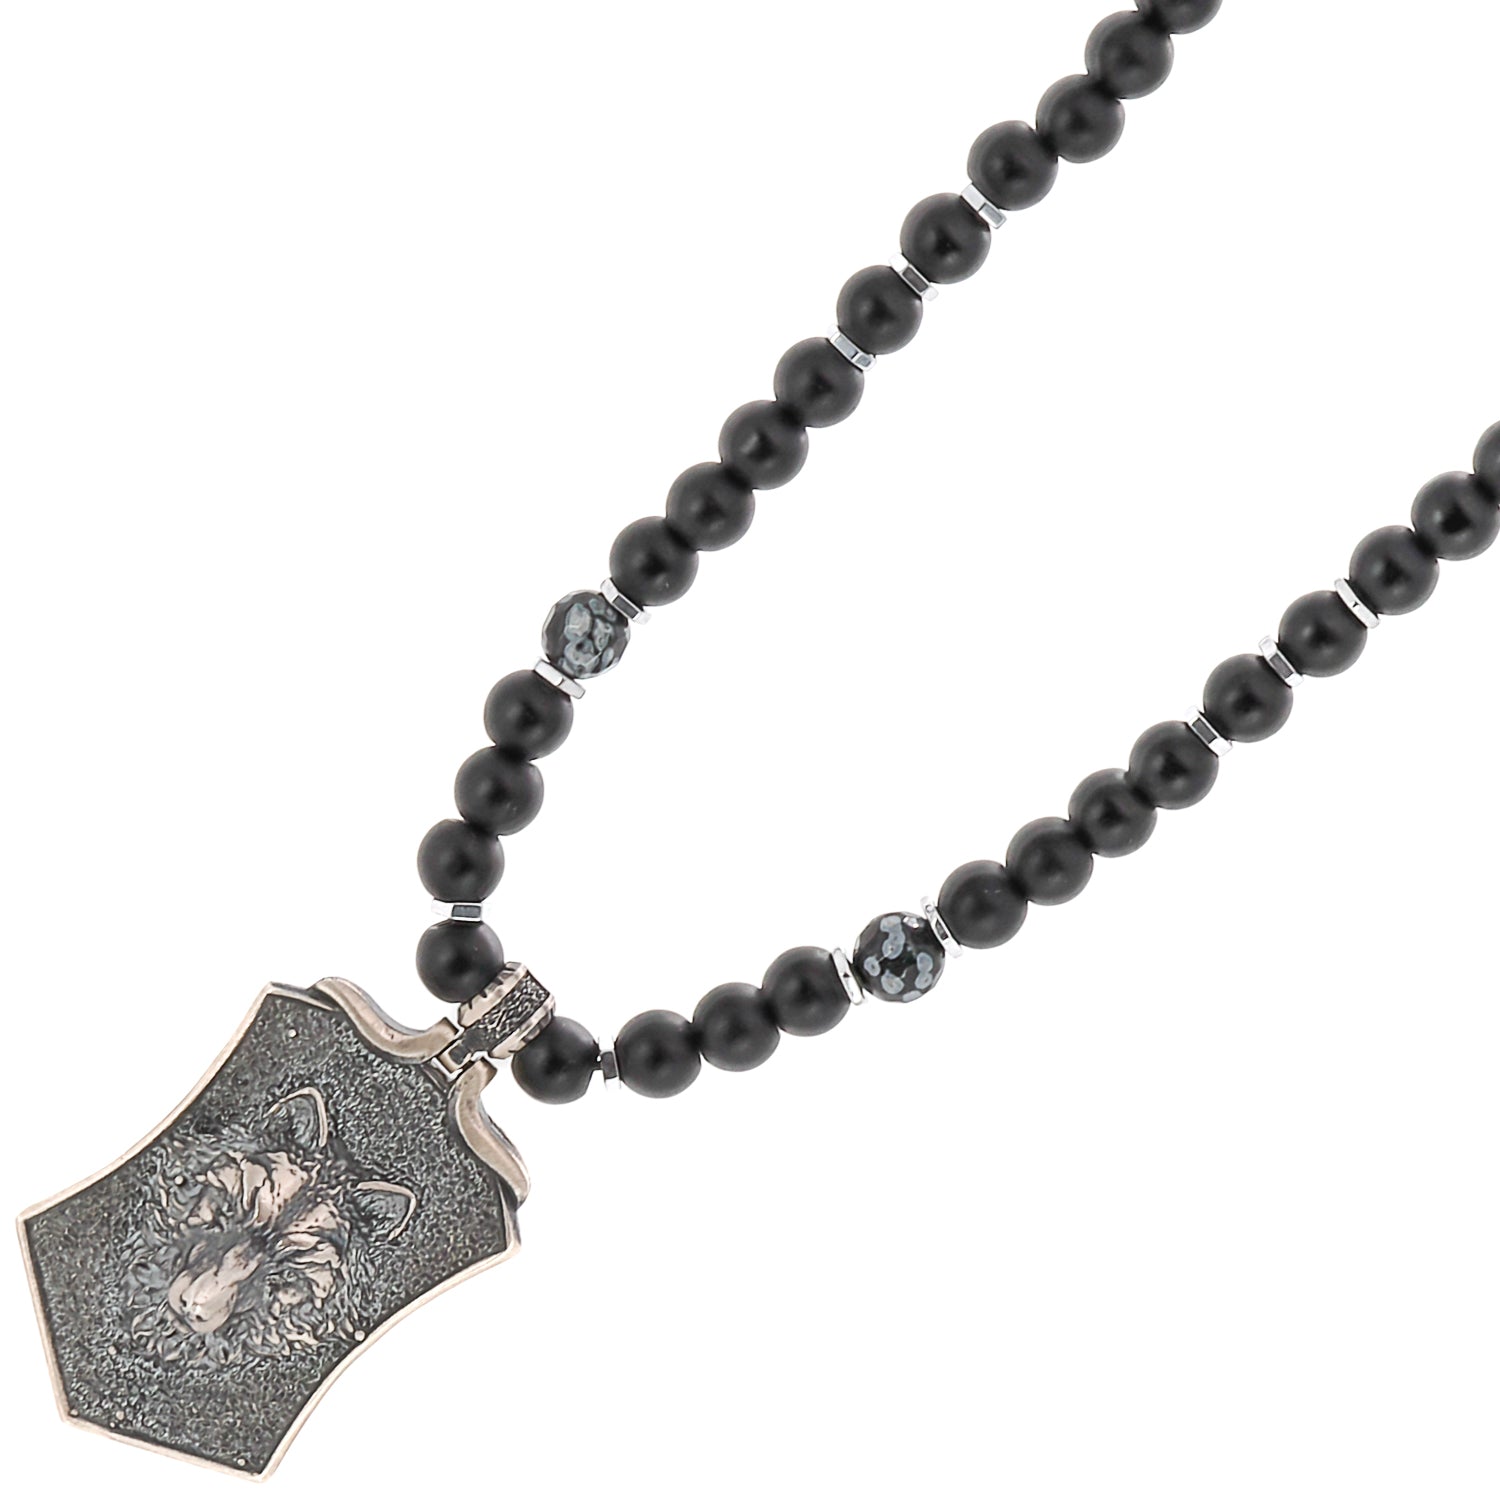 Experience the powerful energy of the Spirit Onyx Wolf Necklace, adorned with black onyx and snowflake obsidian beads.